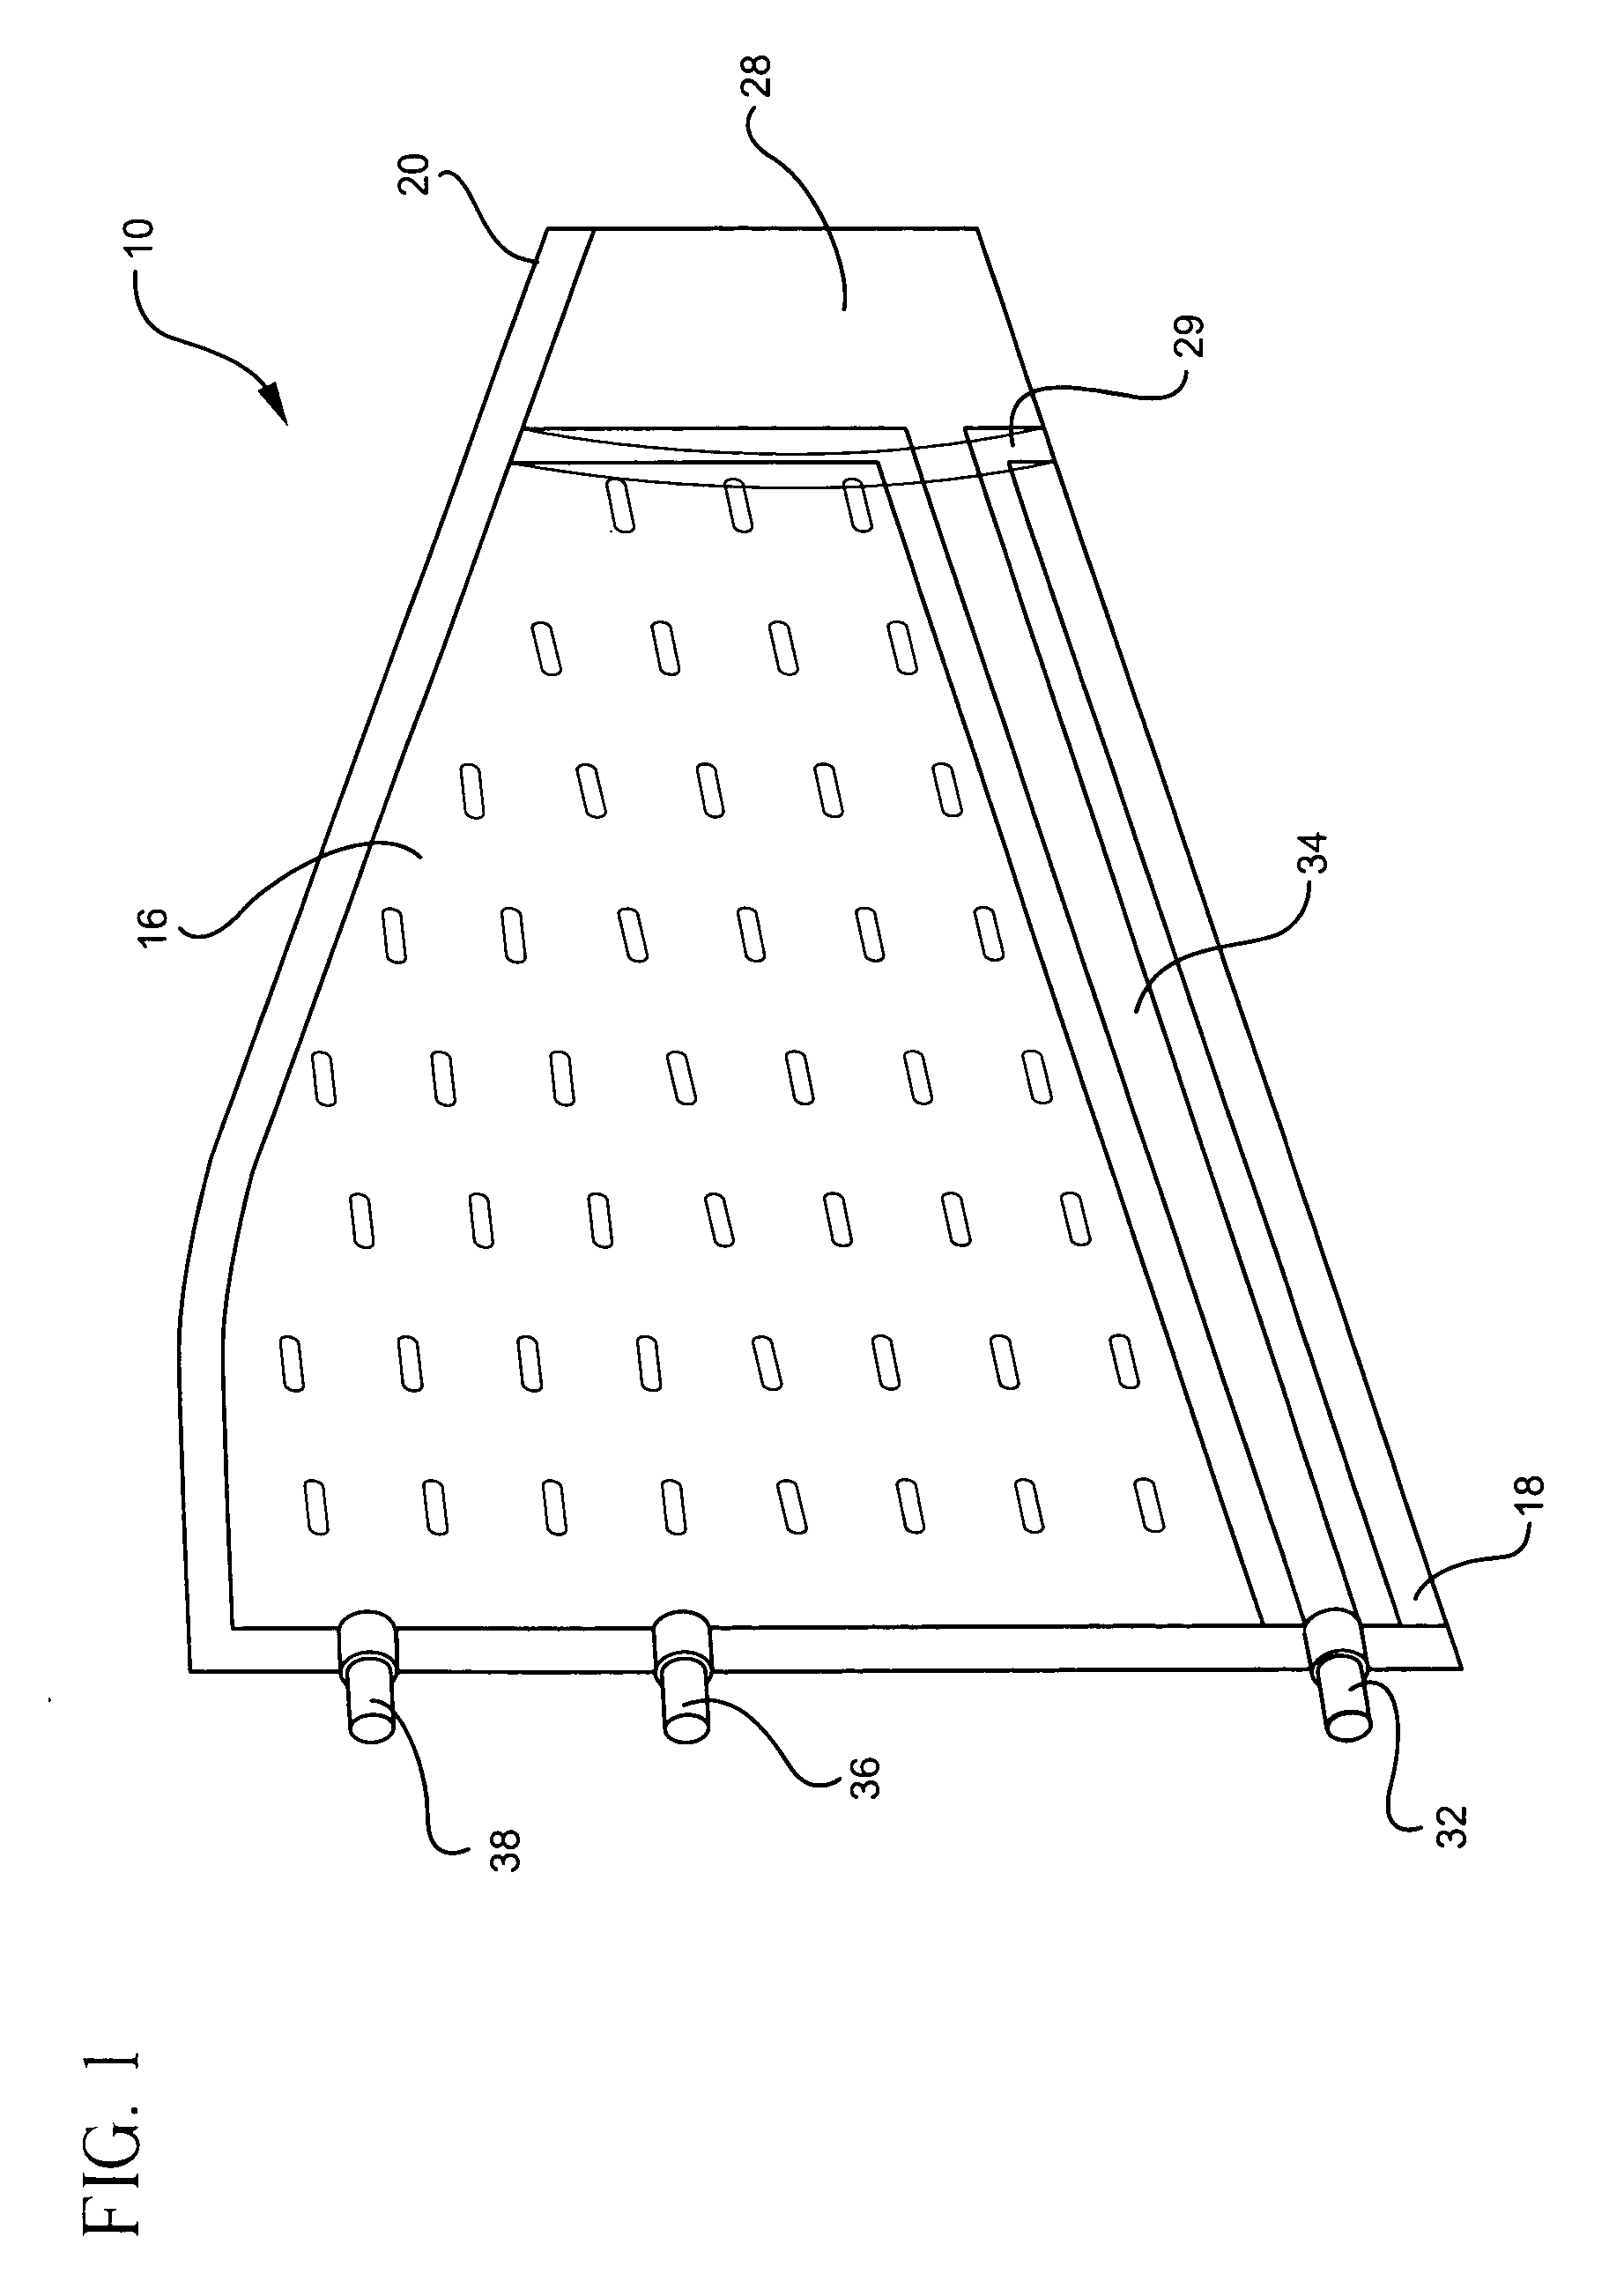 Hyperbaric oxygen devices and delivery methods